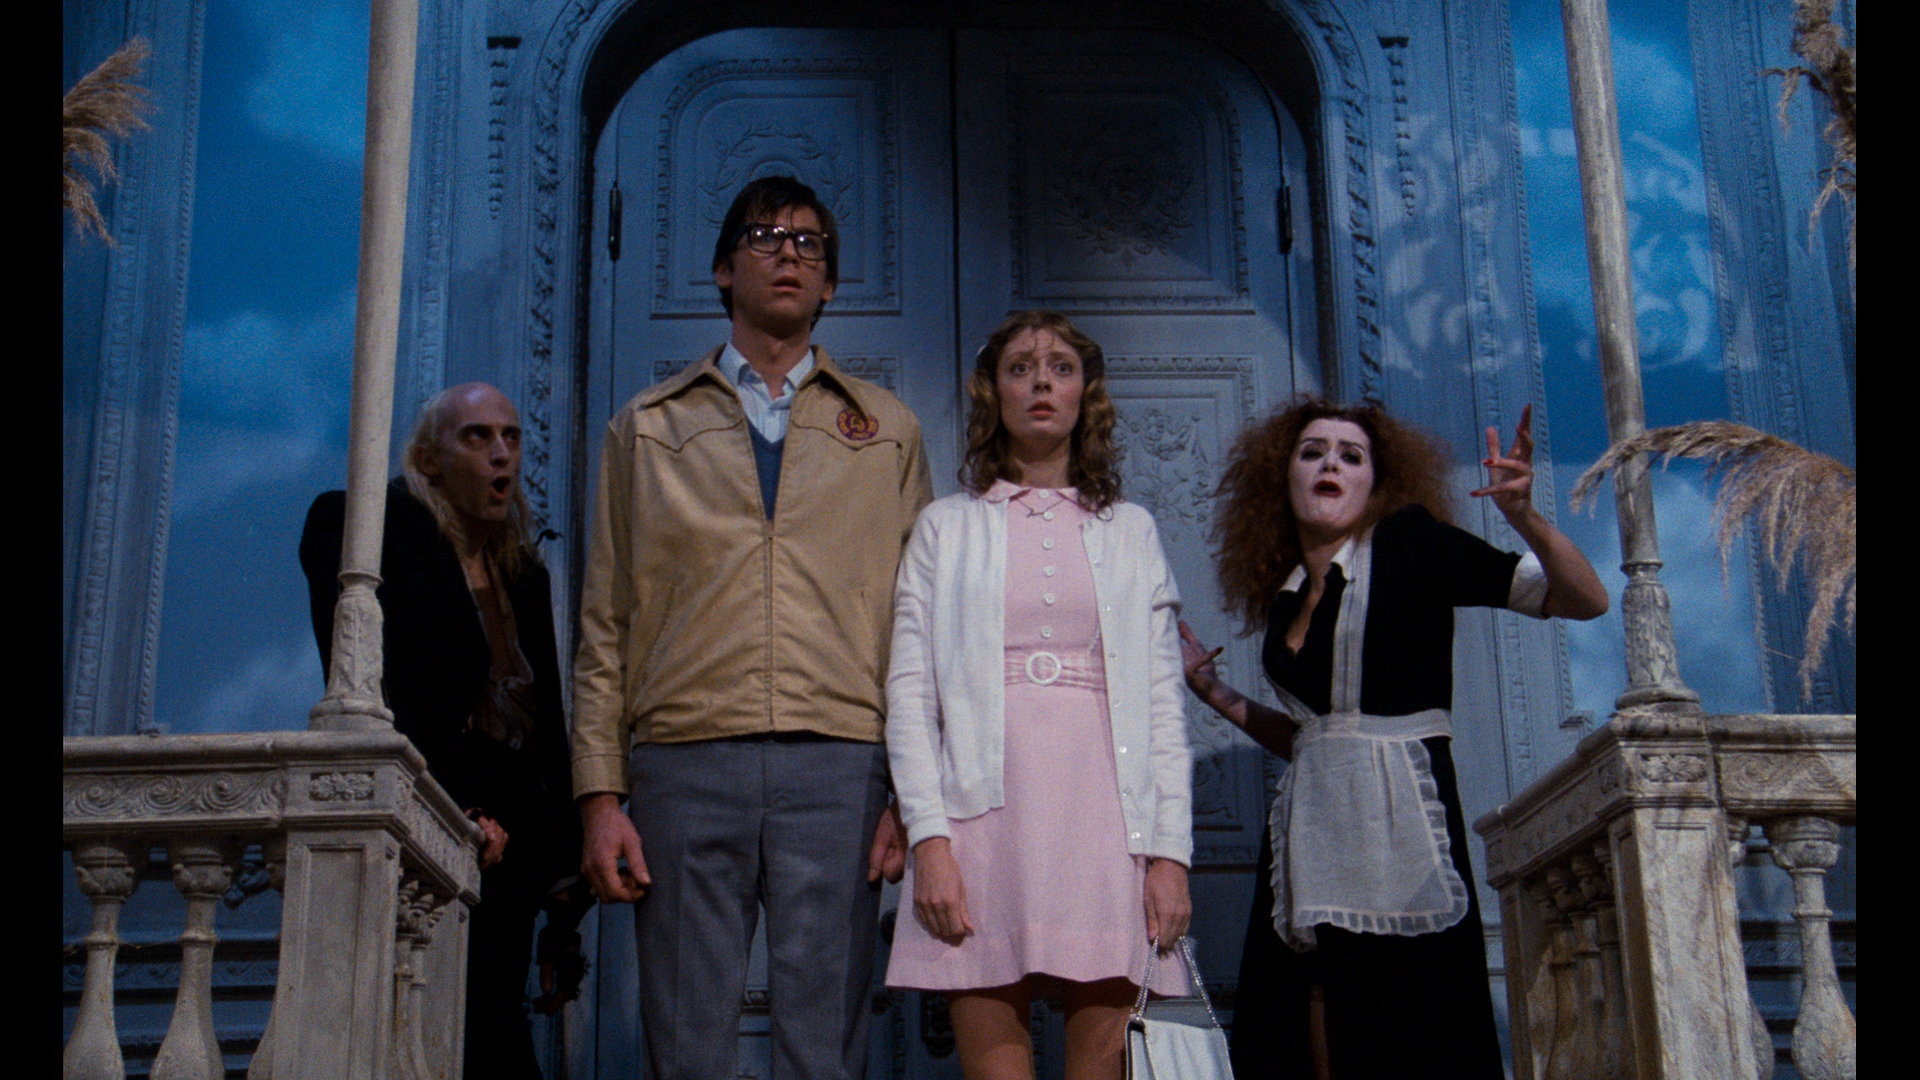 Brad-Majors-Janet-Weiss-From-Rocky-Horror-Picture-Show.png